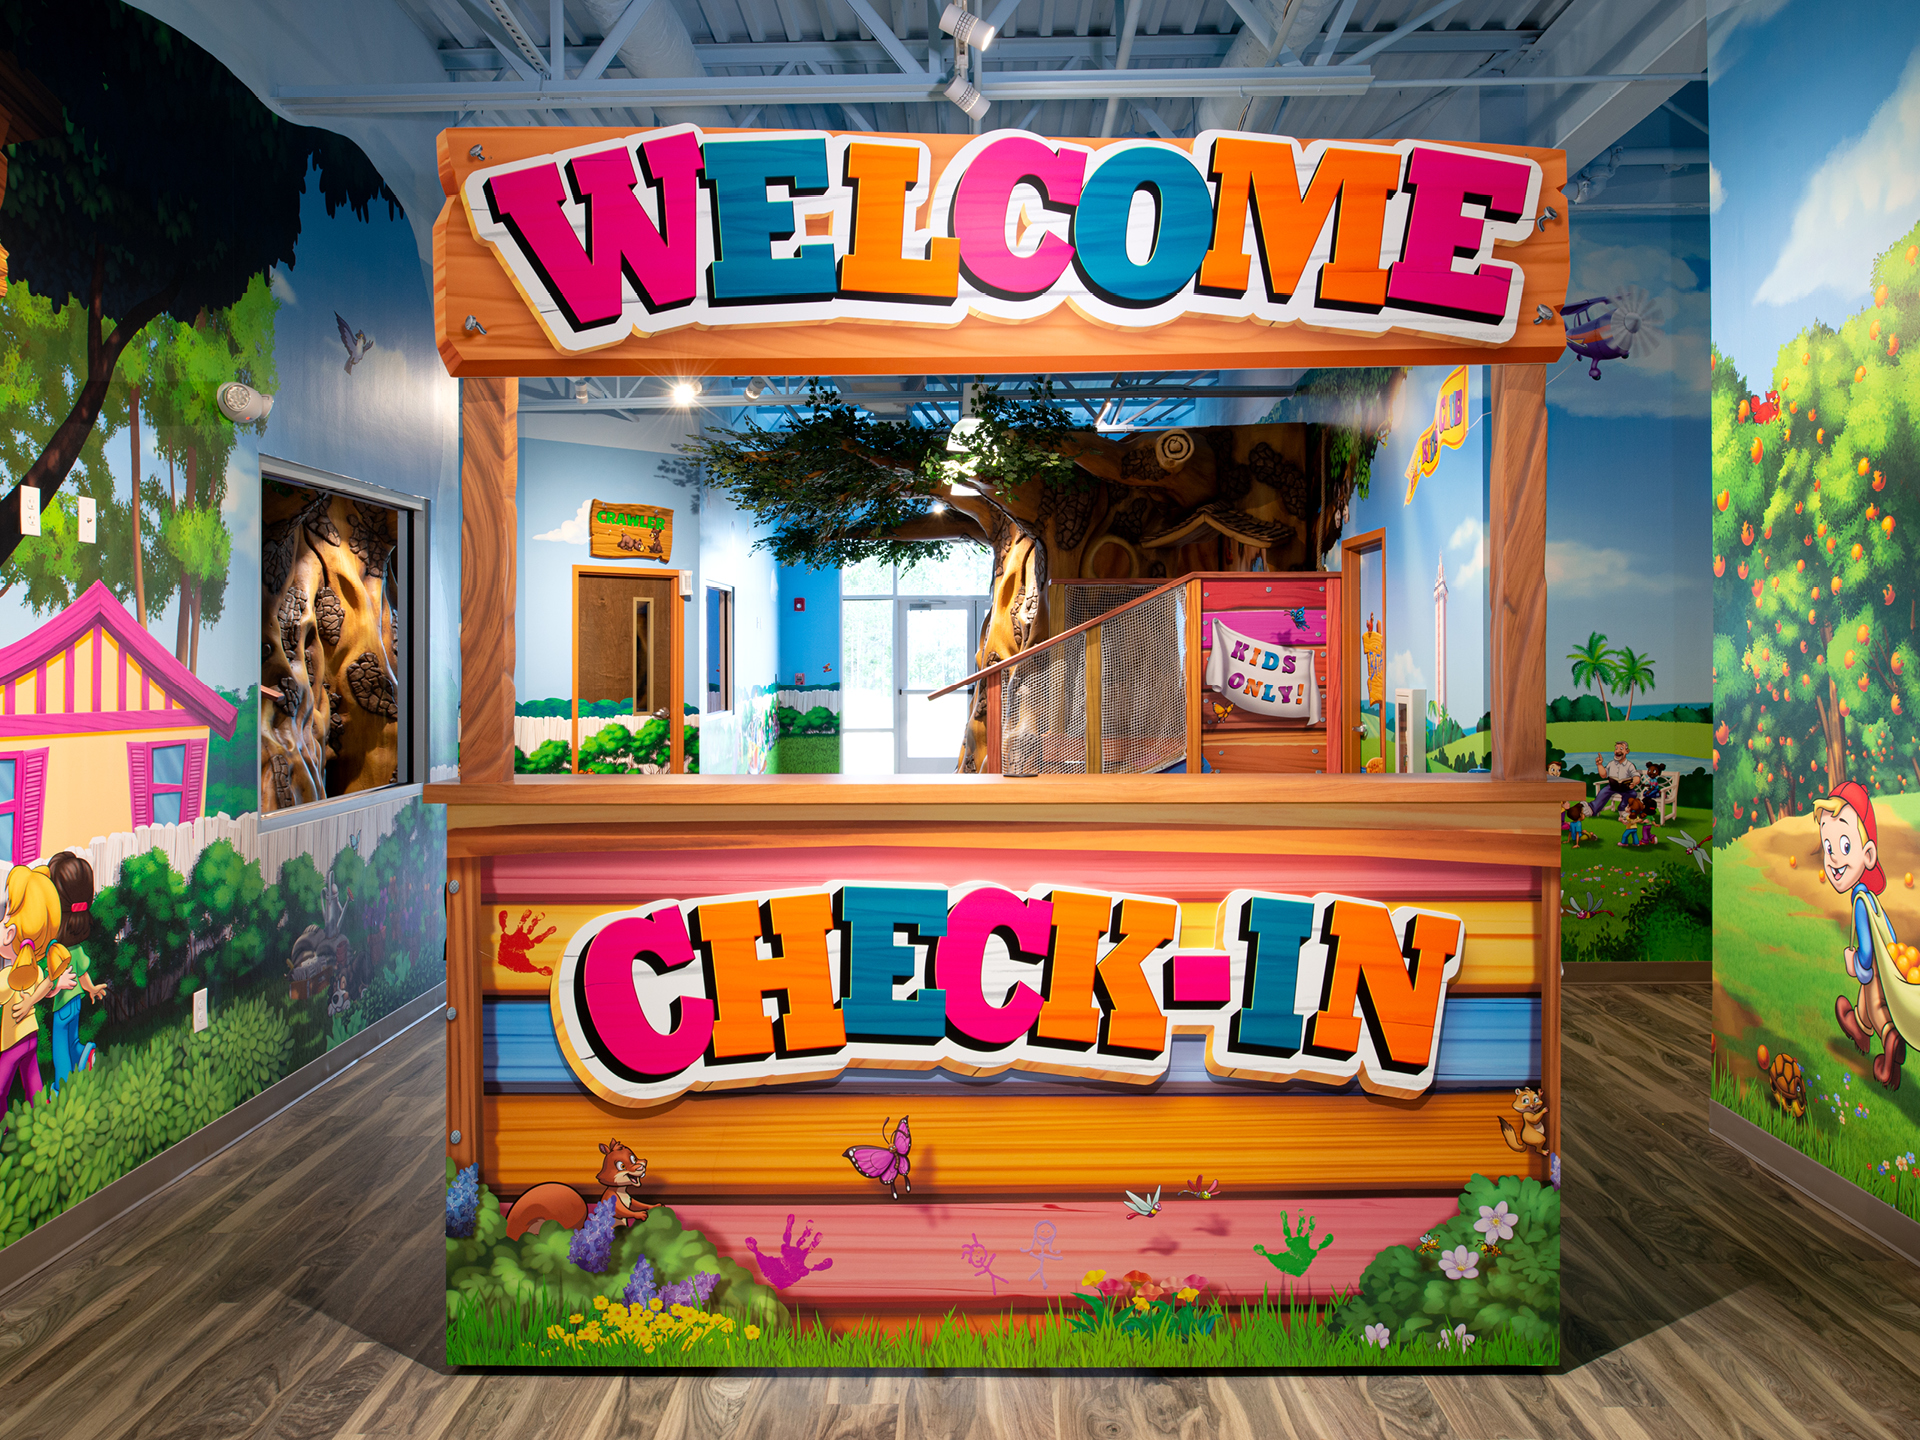 First Baptist Church of Clermont Kids Play Area Welcome Center